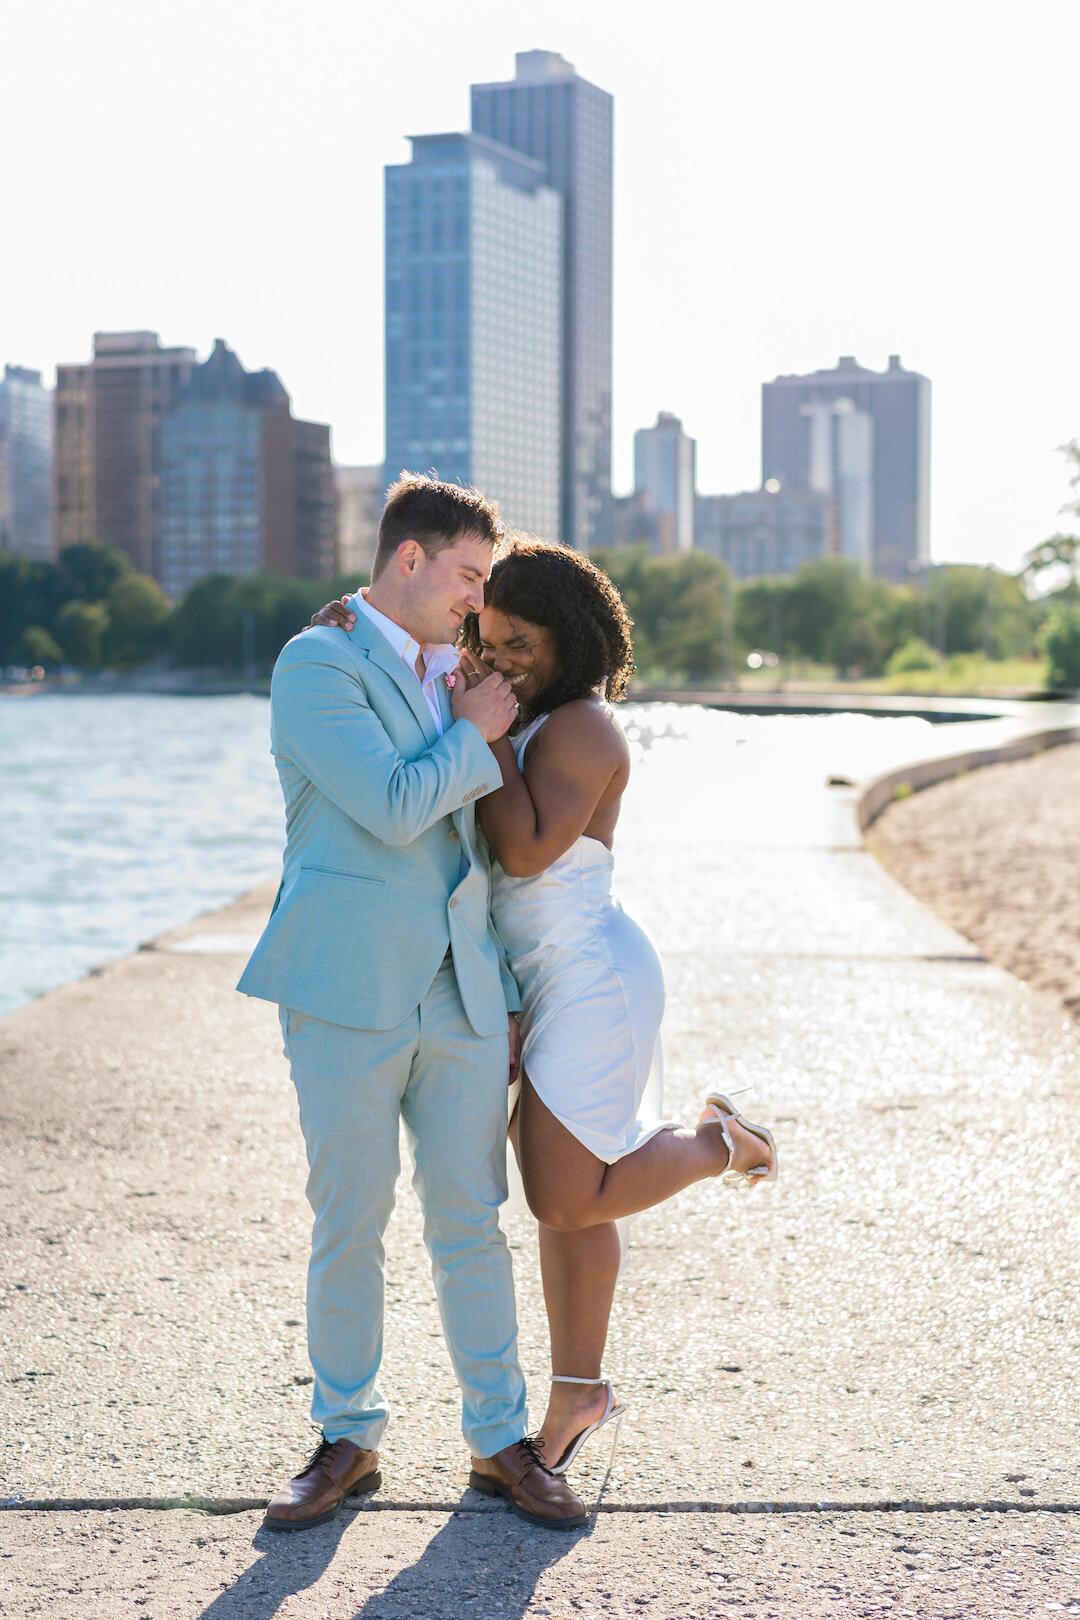 Eliana-Melmed-Photography-Chicago-Couples-Photography-Deluxe-10